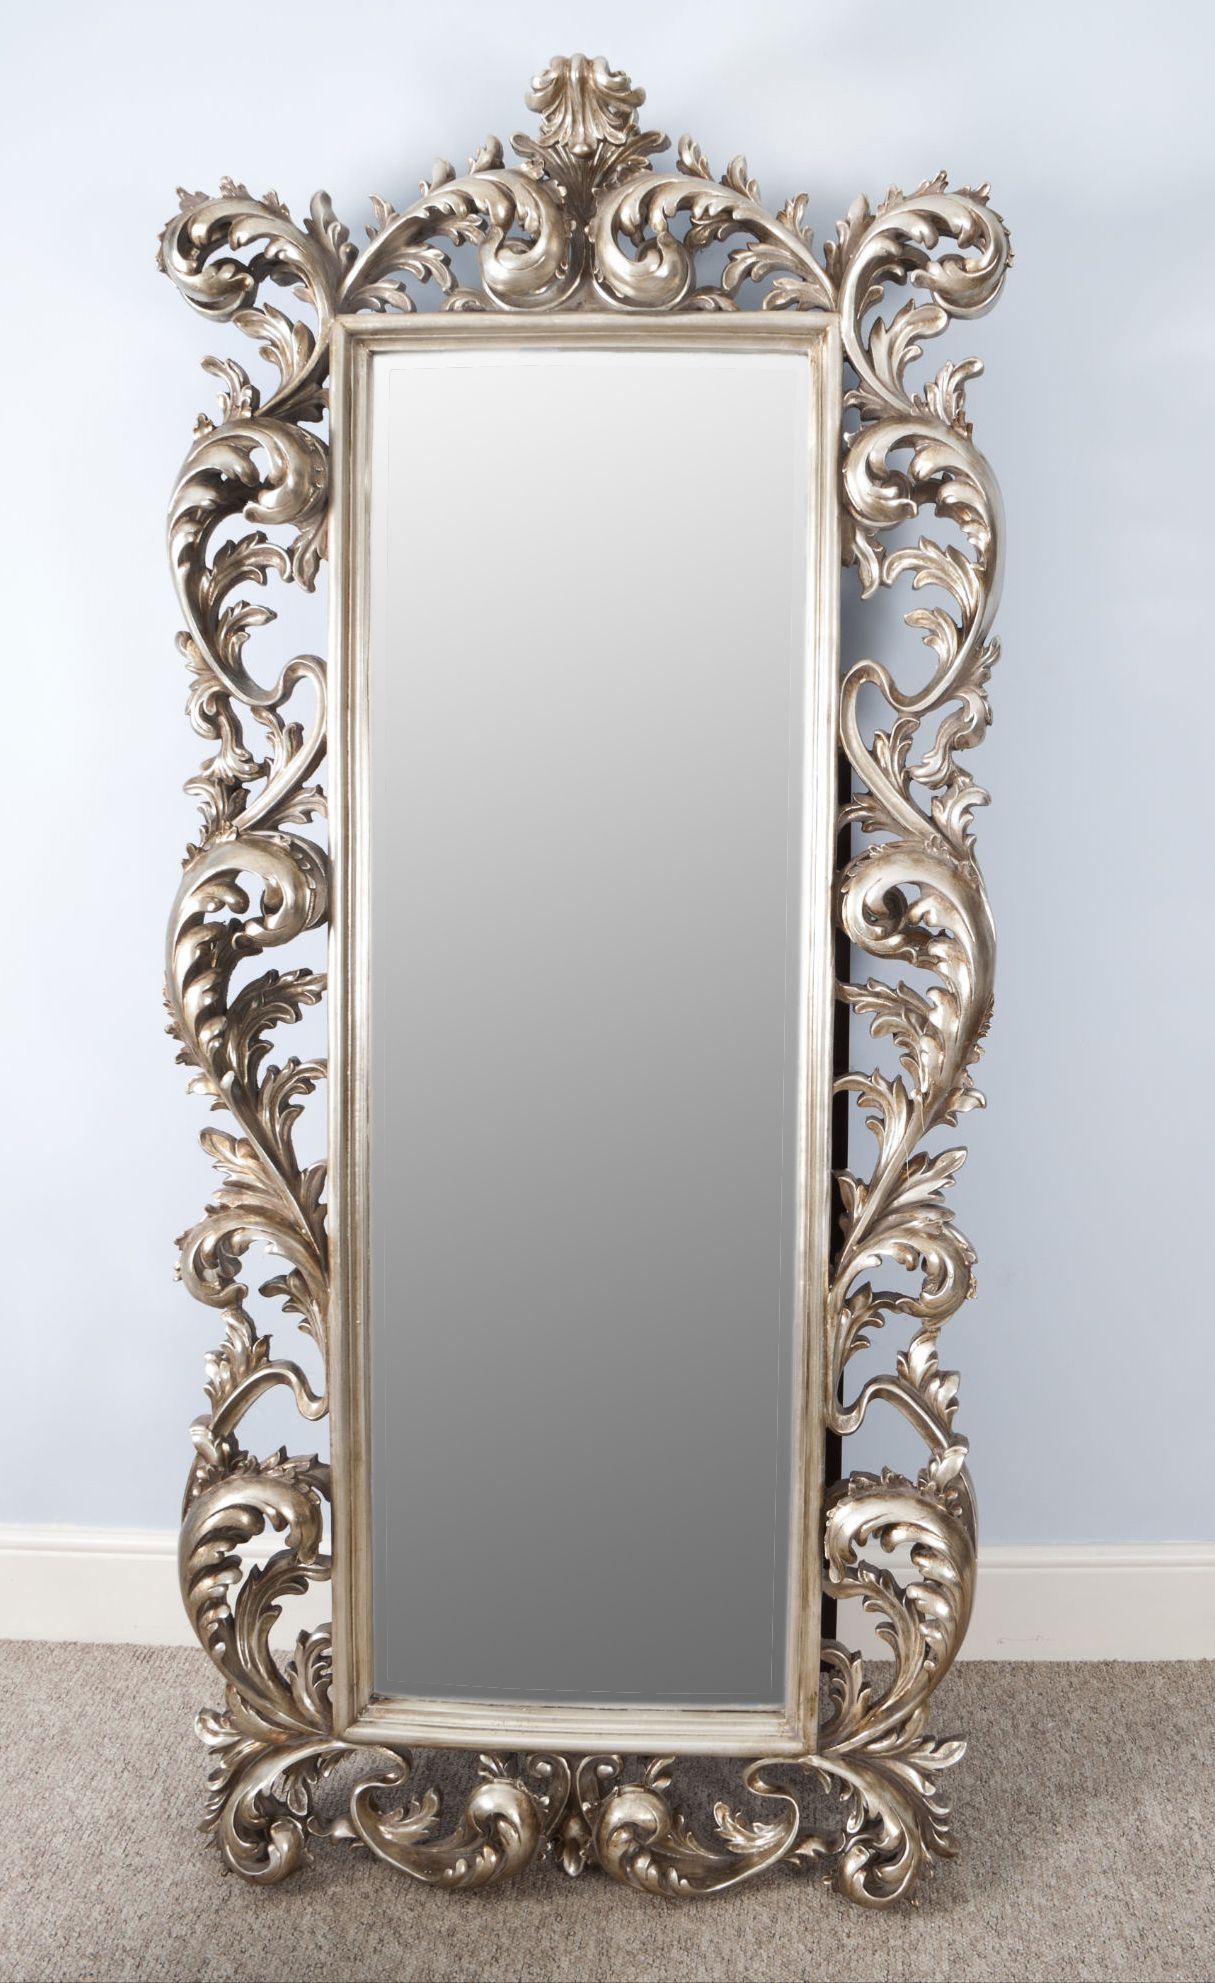 Wondrous Old Oval Mirror Antique Cheval Wall Mirror Likewise Grey In Large Old Mirrors For Sale (View 13 of 15)